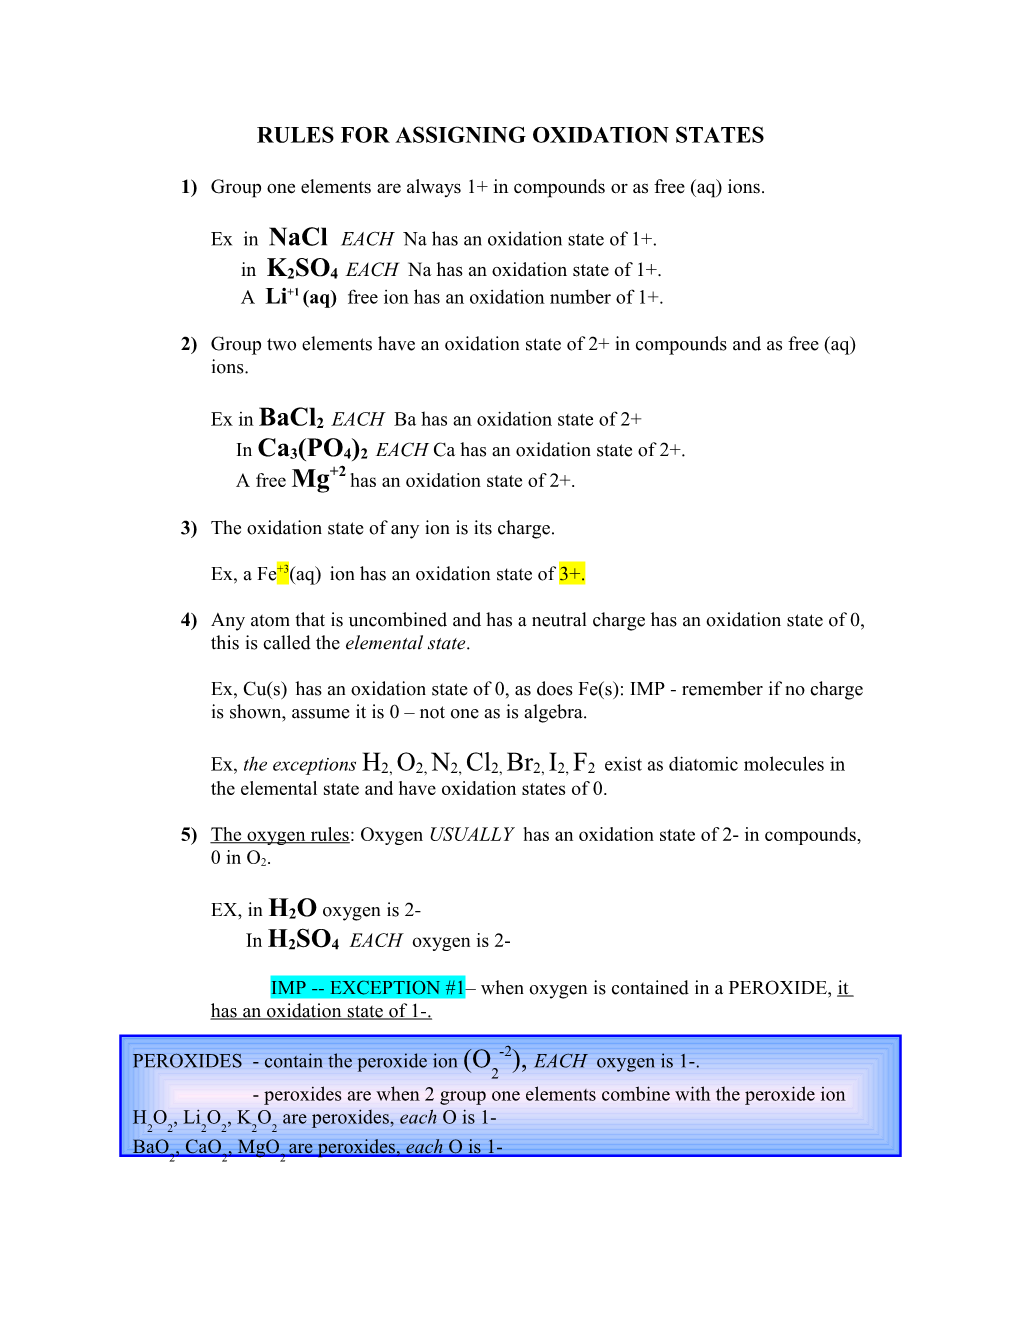 Rules for Assigning Oxidation States